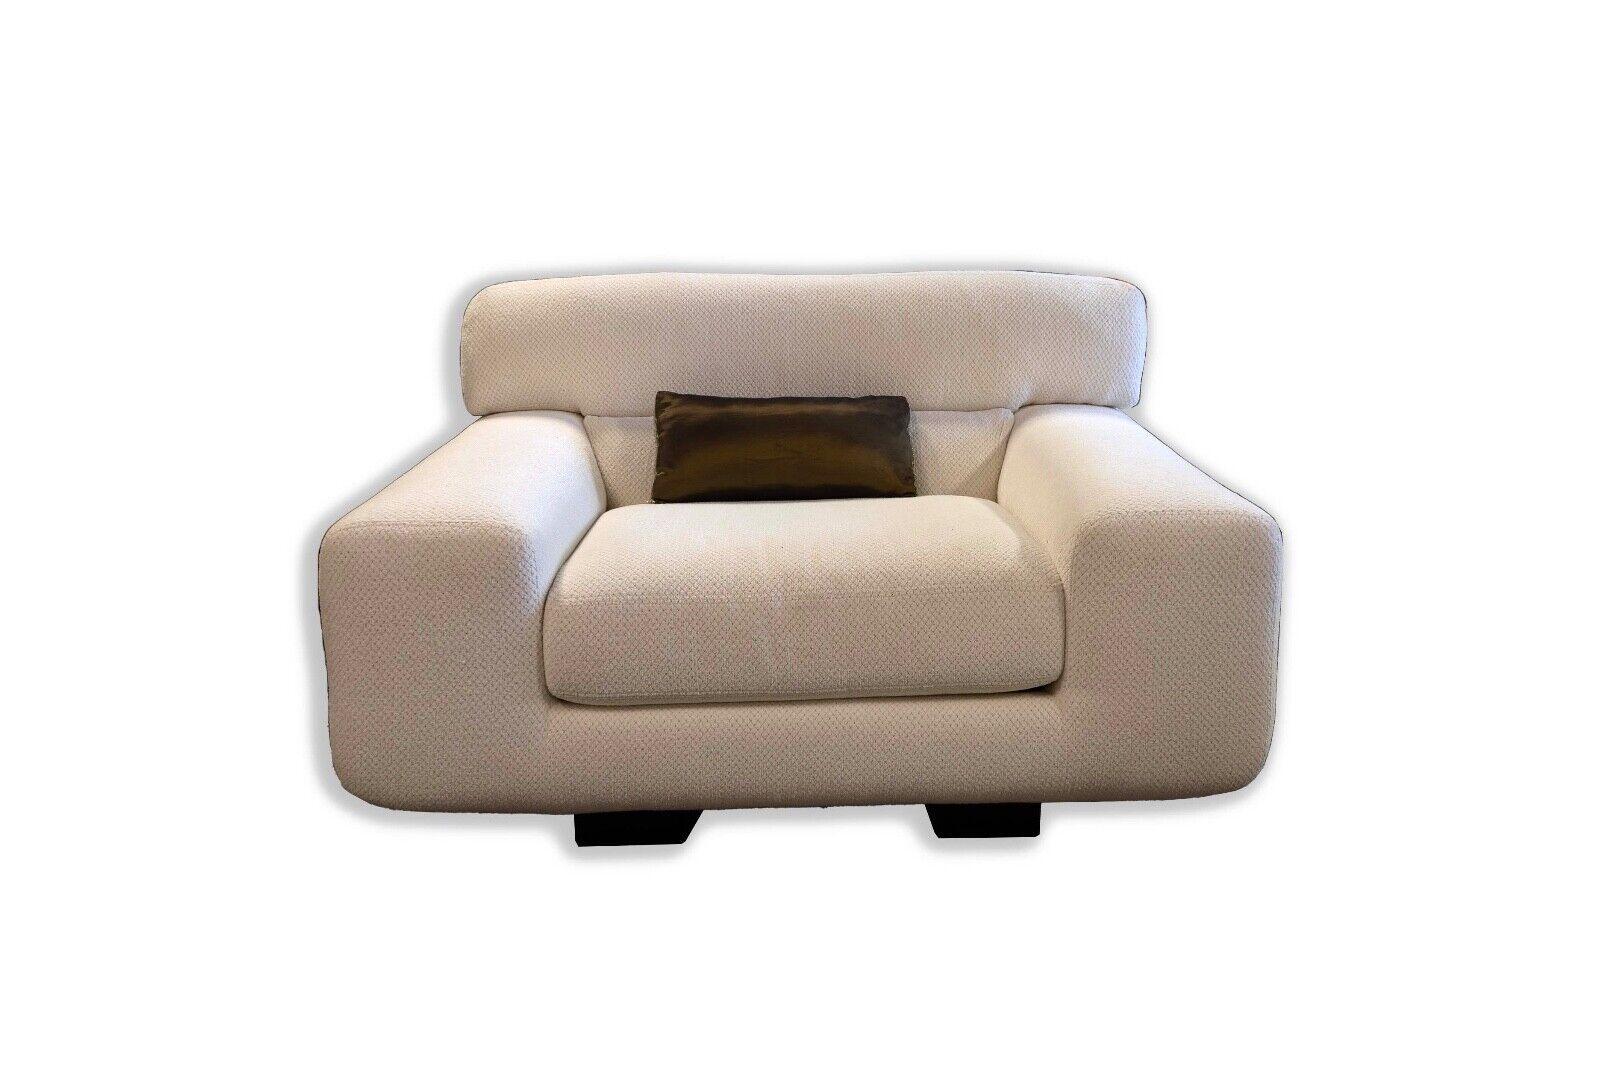 Contemporary Modern White Preview Furniture Corporation Sofa and Lounge Chair In Good Condition For Sale In Keego Harbor, MI